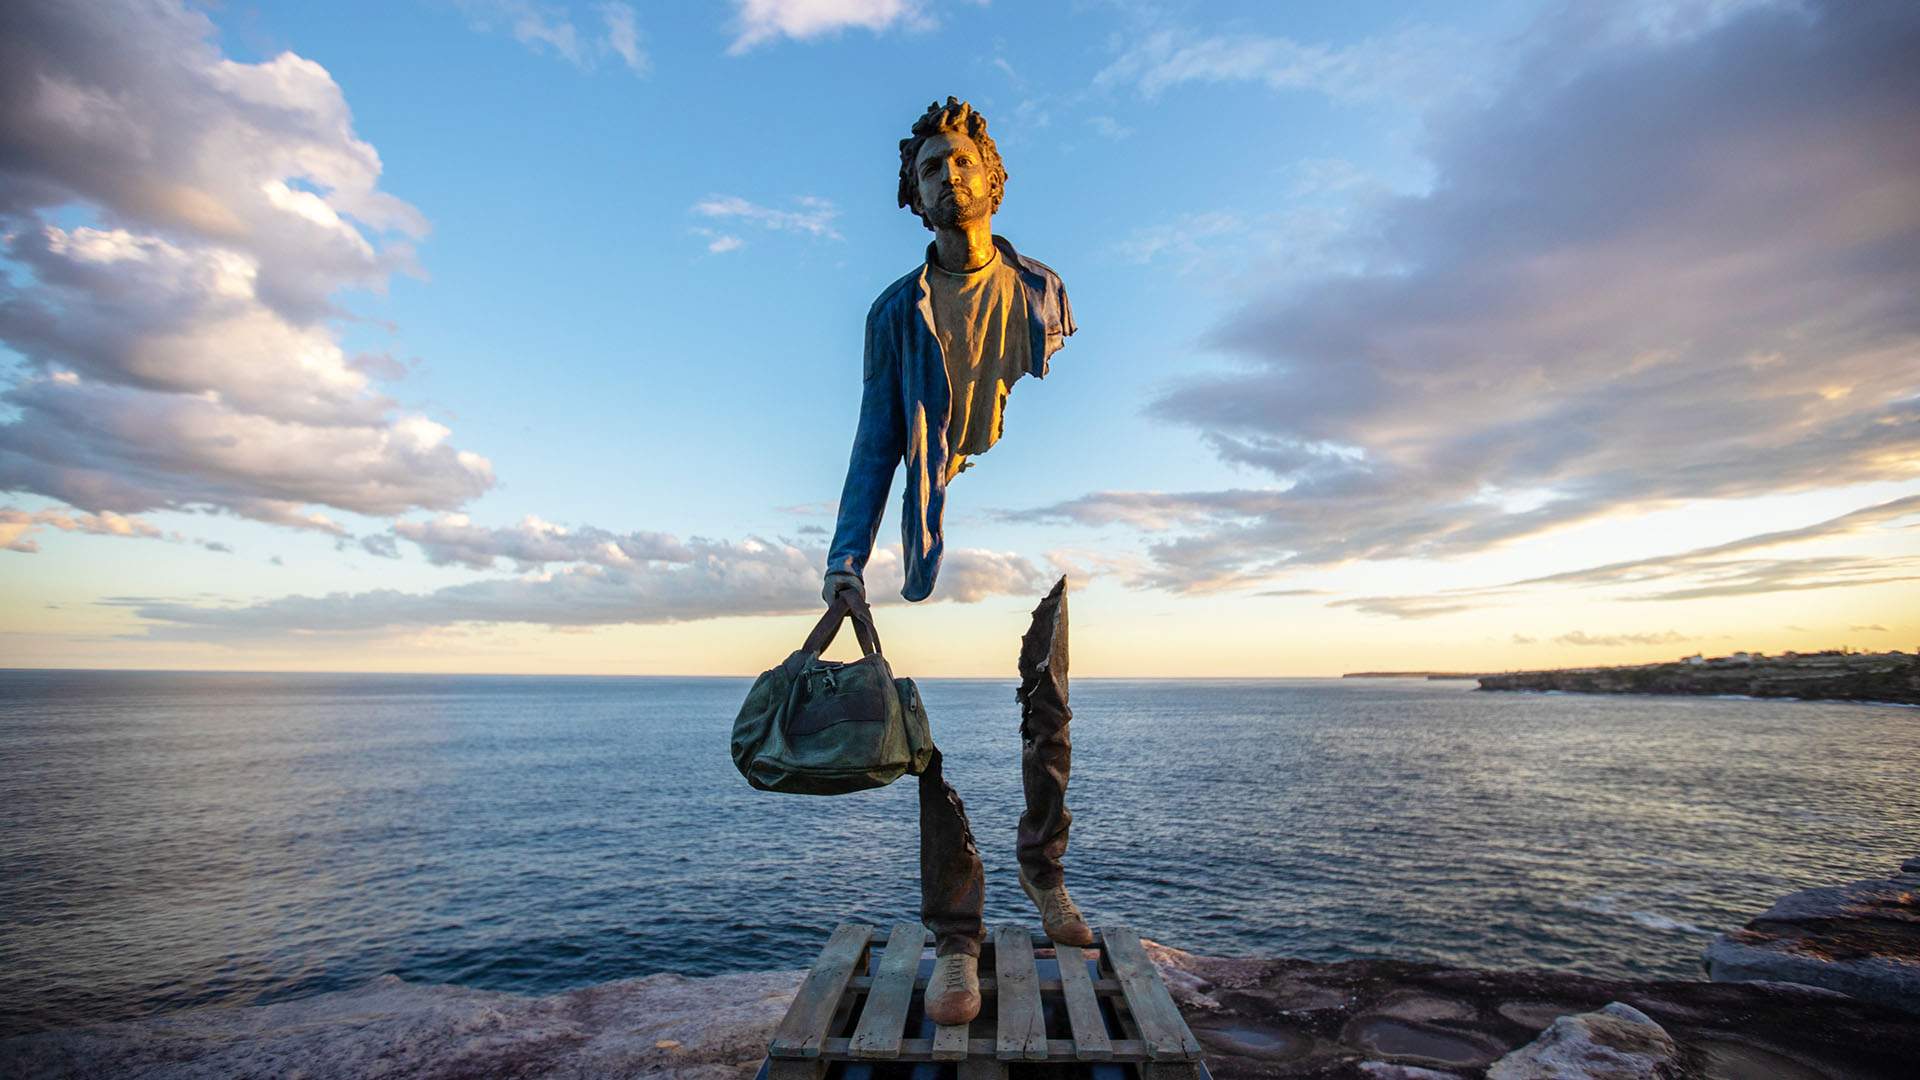 Bondi's 'Sculpture by the Sea' Will Mark Its 25th Year in 2023 with Artists Who Displayed at Its 1997 Debut